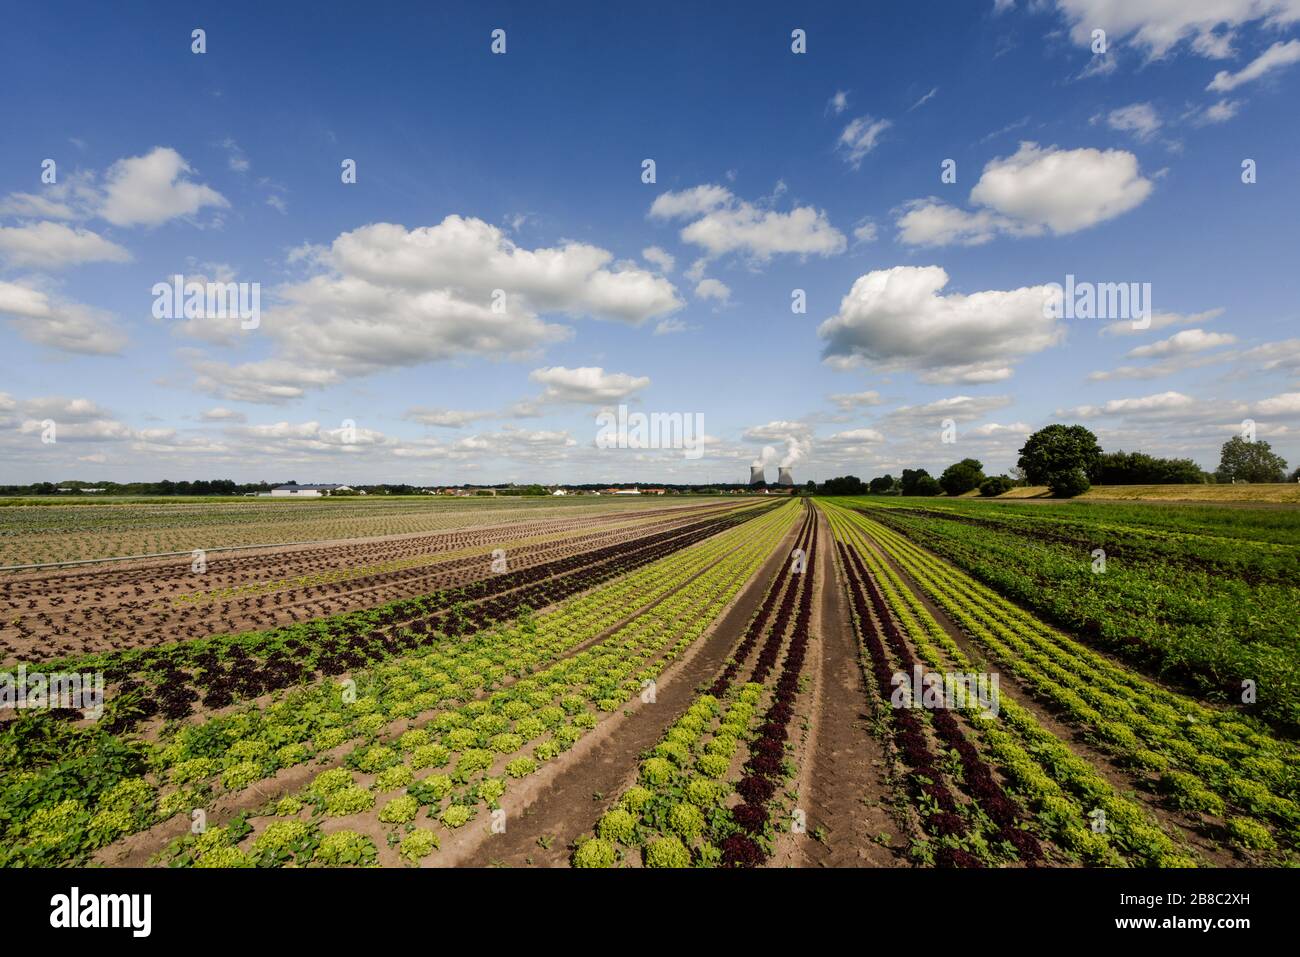 Salad field with a nuclear power station in the background, Germany Stock Photo